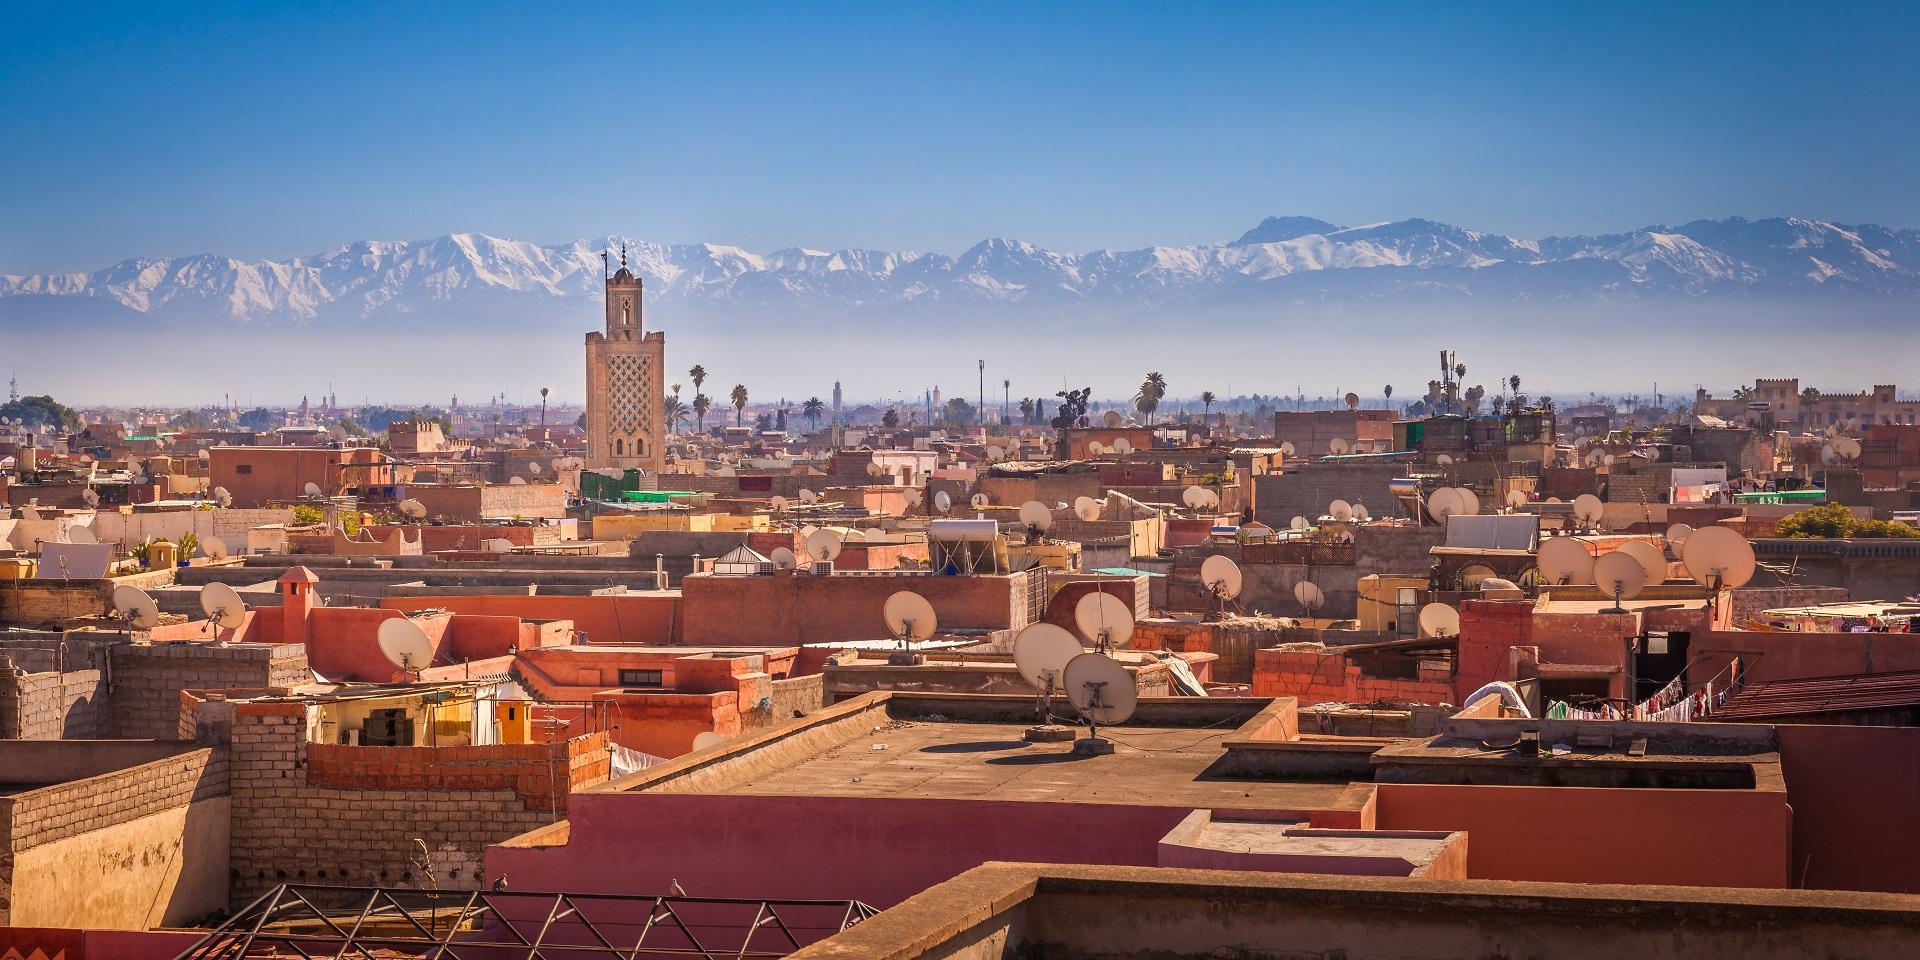 Things to do in and around Marrakech